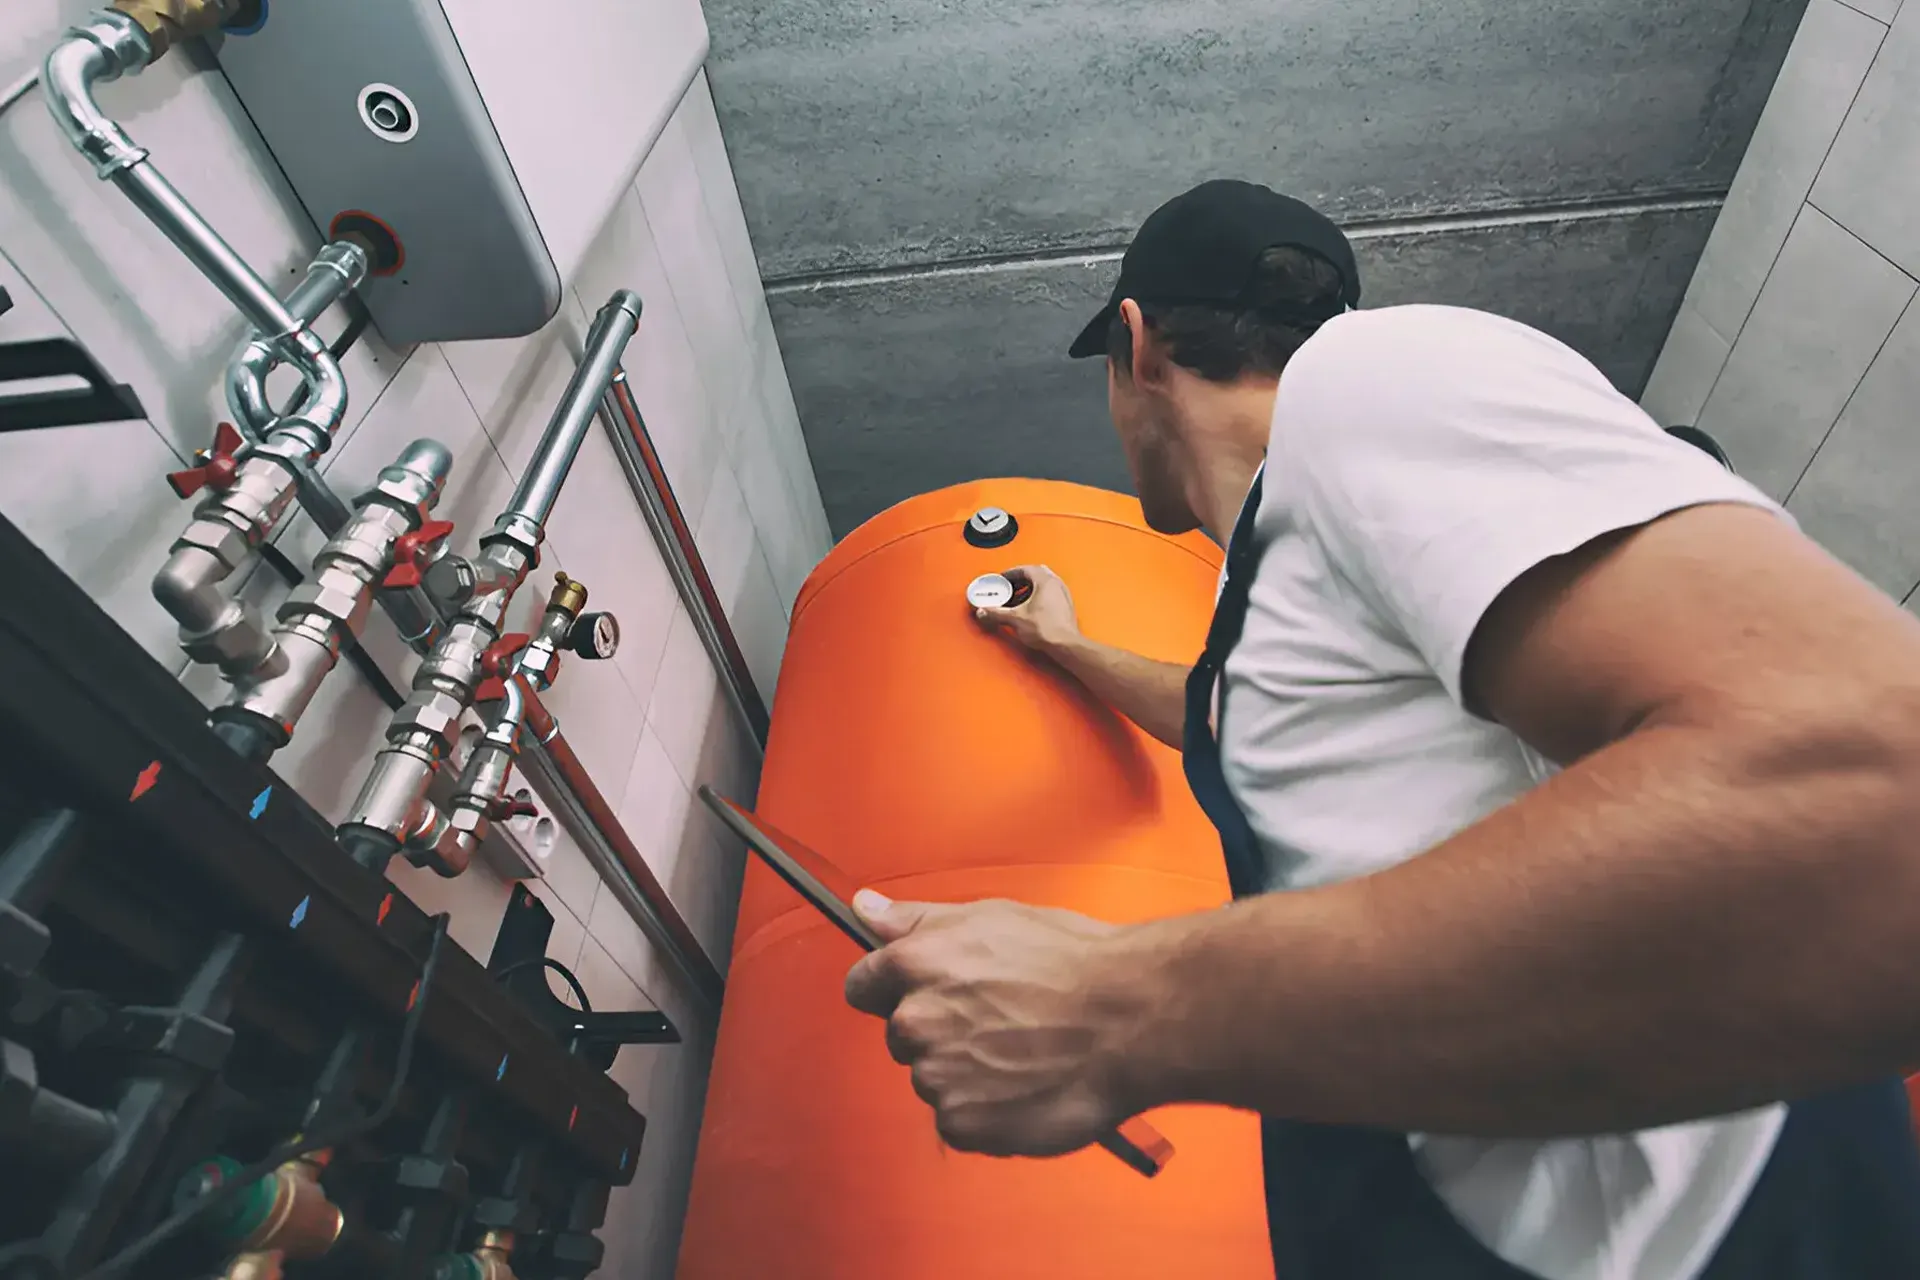 The installation of heating systems is essential to keep your home warm and comfortable during the coldest months of the year. Whether you need to install a central heating system, a boiler, or radiant heating system, our team of experts can provide professional and reliable installation that meets your heating needs.